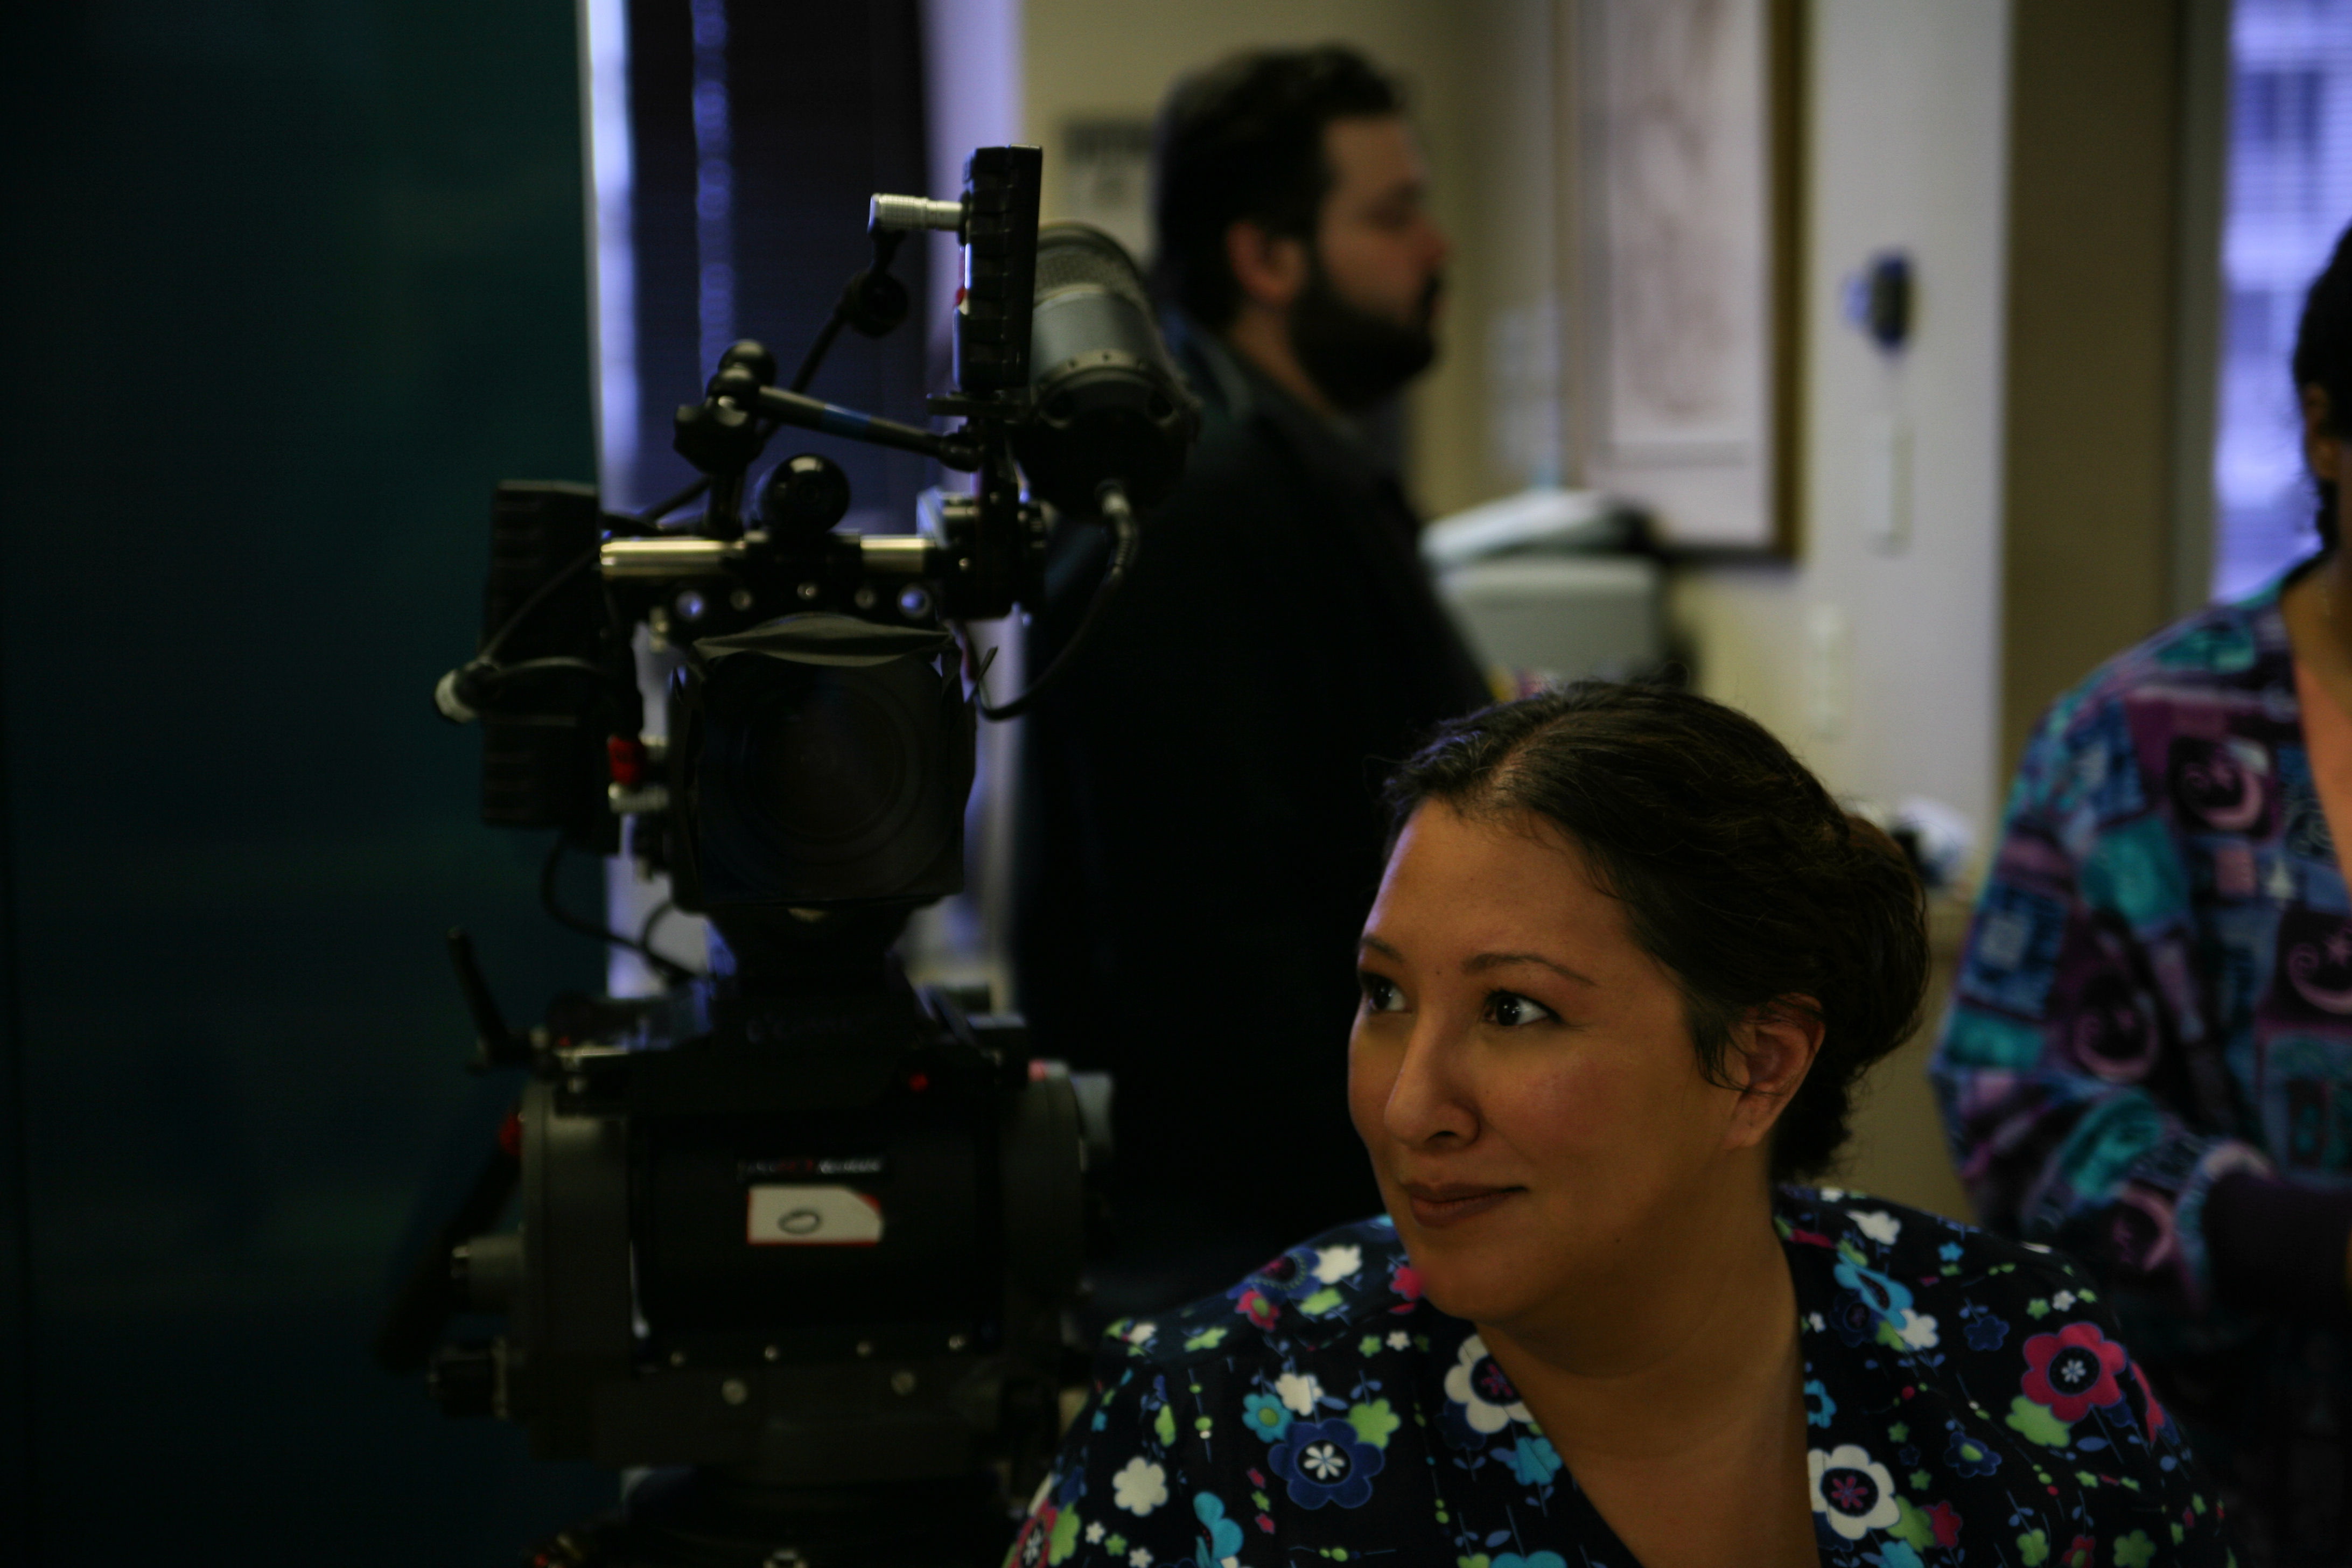 Erica Arias on the set of the film 